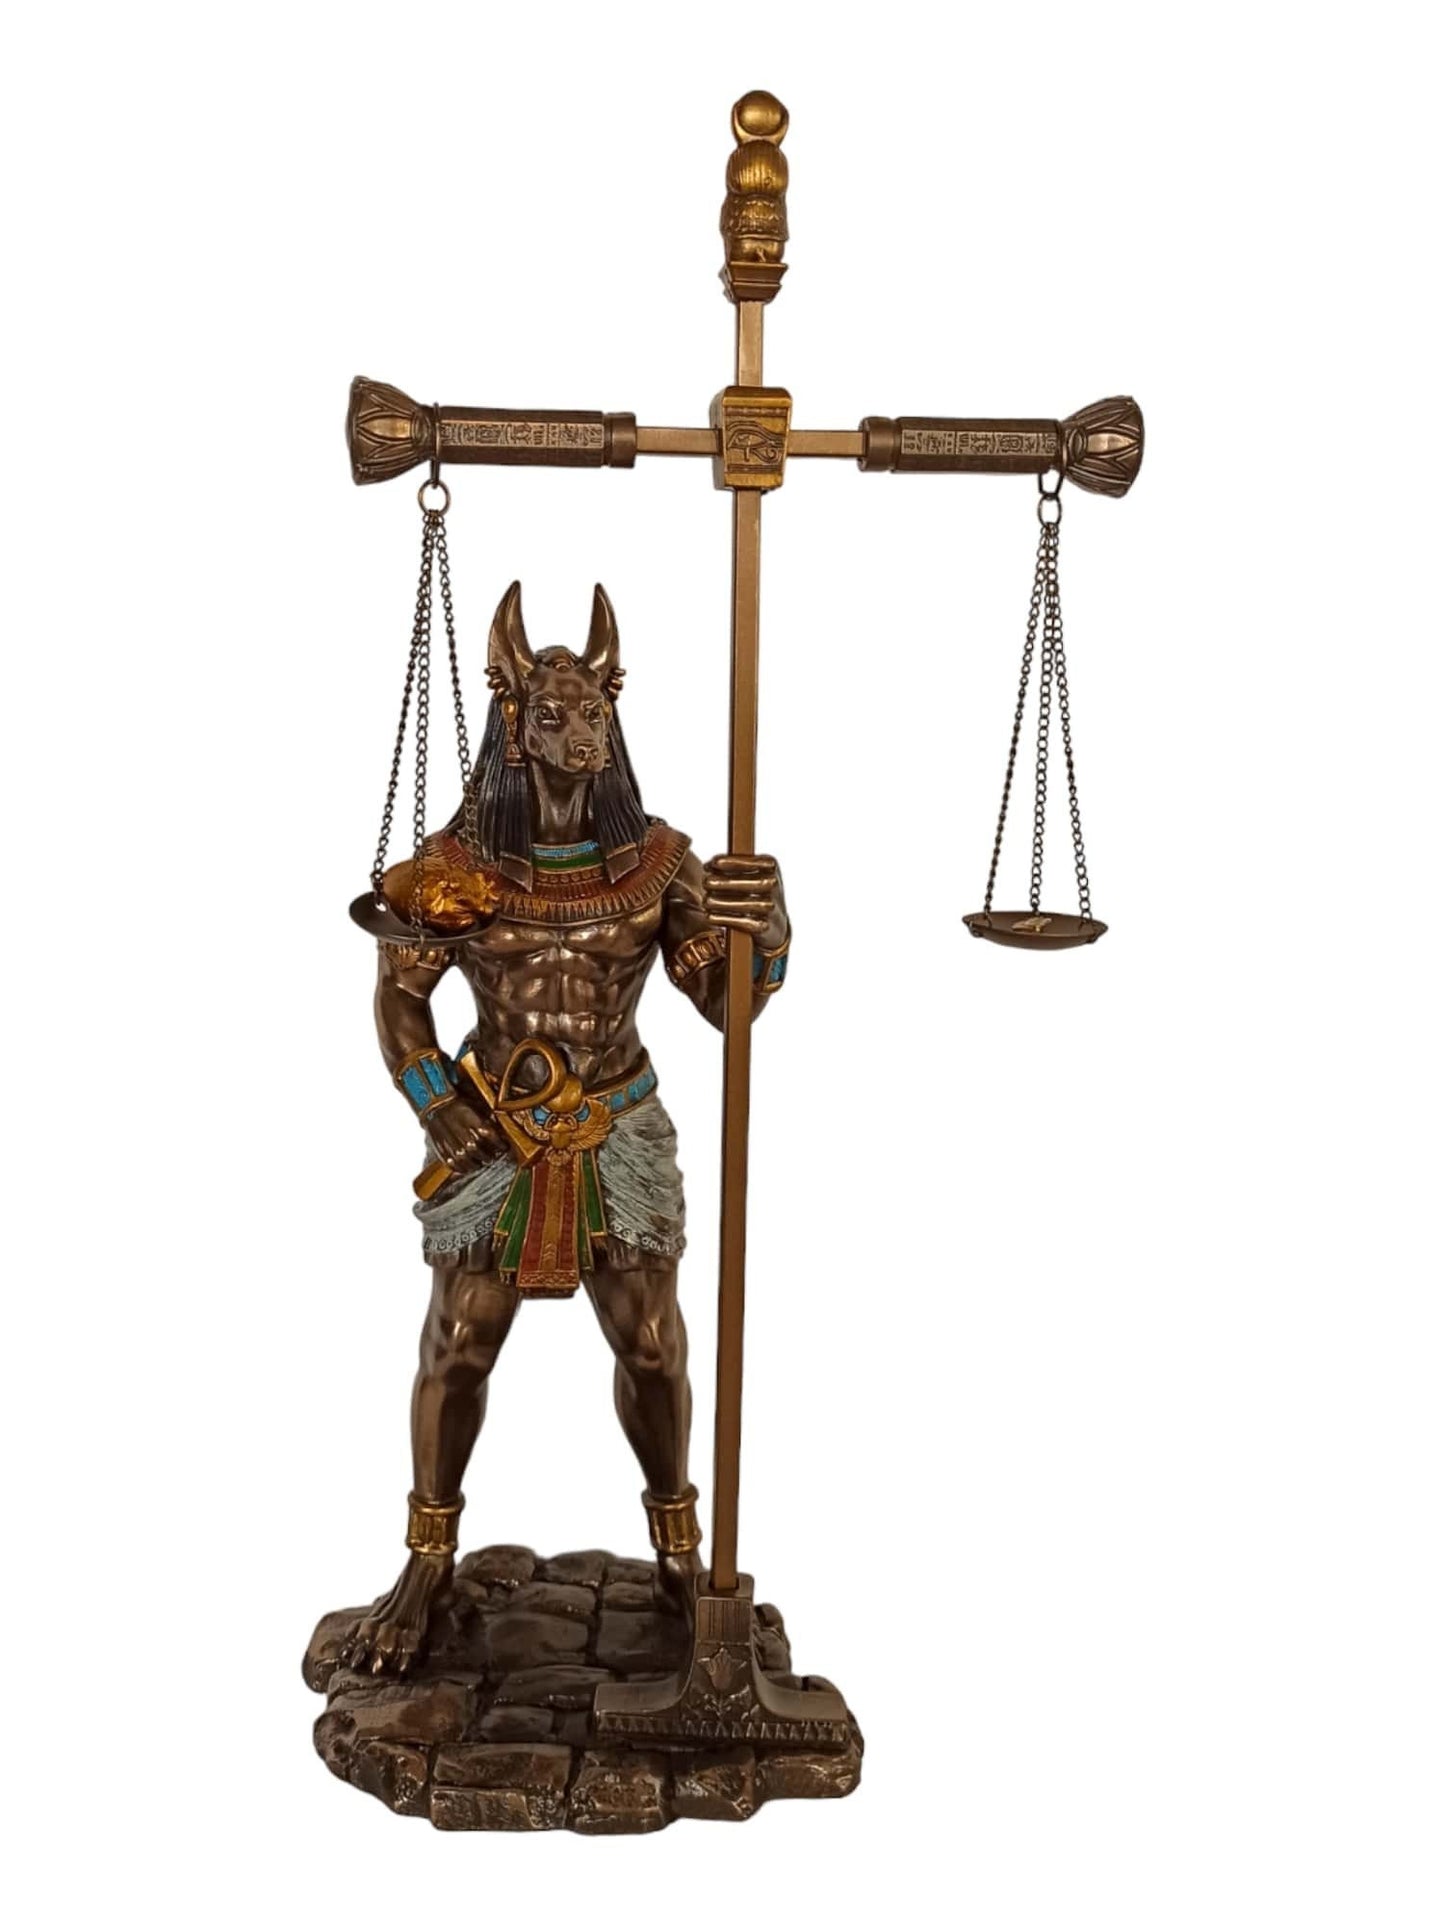 Anubis - The God of Funerary Rites, Protector of Graves, and Guide to the Underworld, in Ancient Egyptian Religion - Cold Cast Bronze Resin